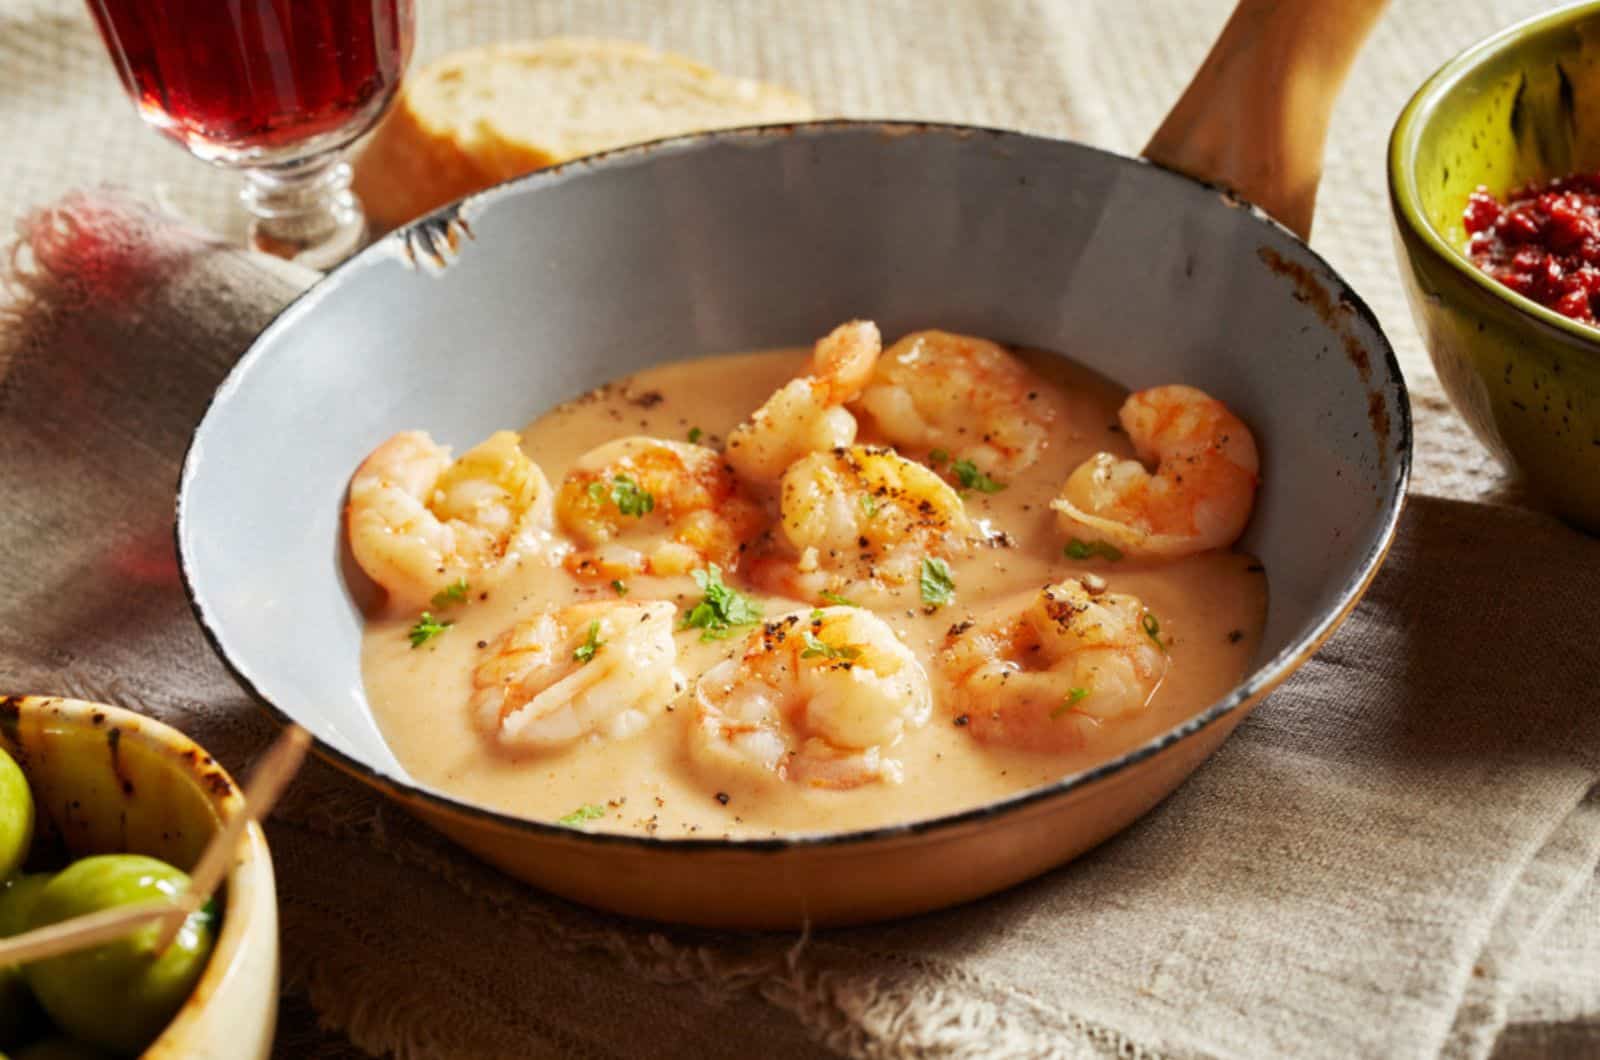 shrimps in cheese-cream sauce or kase sahne sauce served in an old small pan